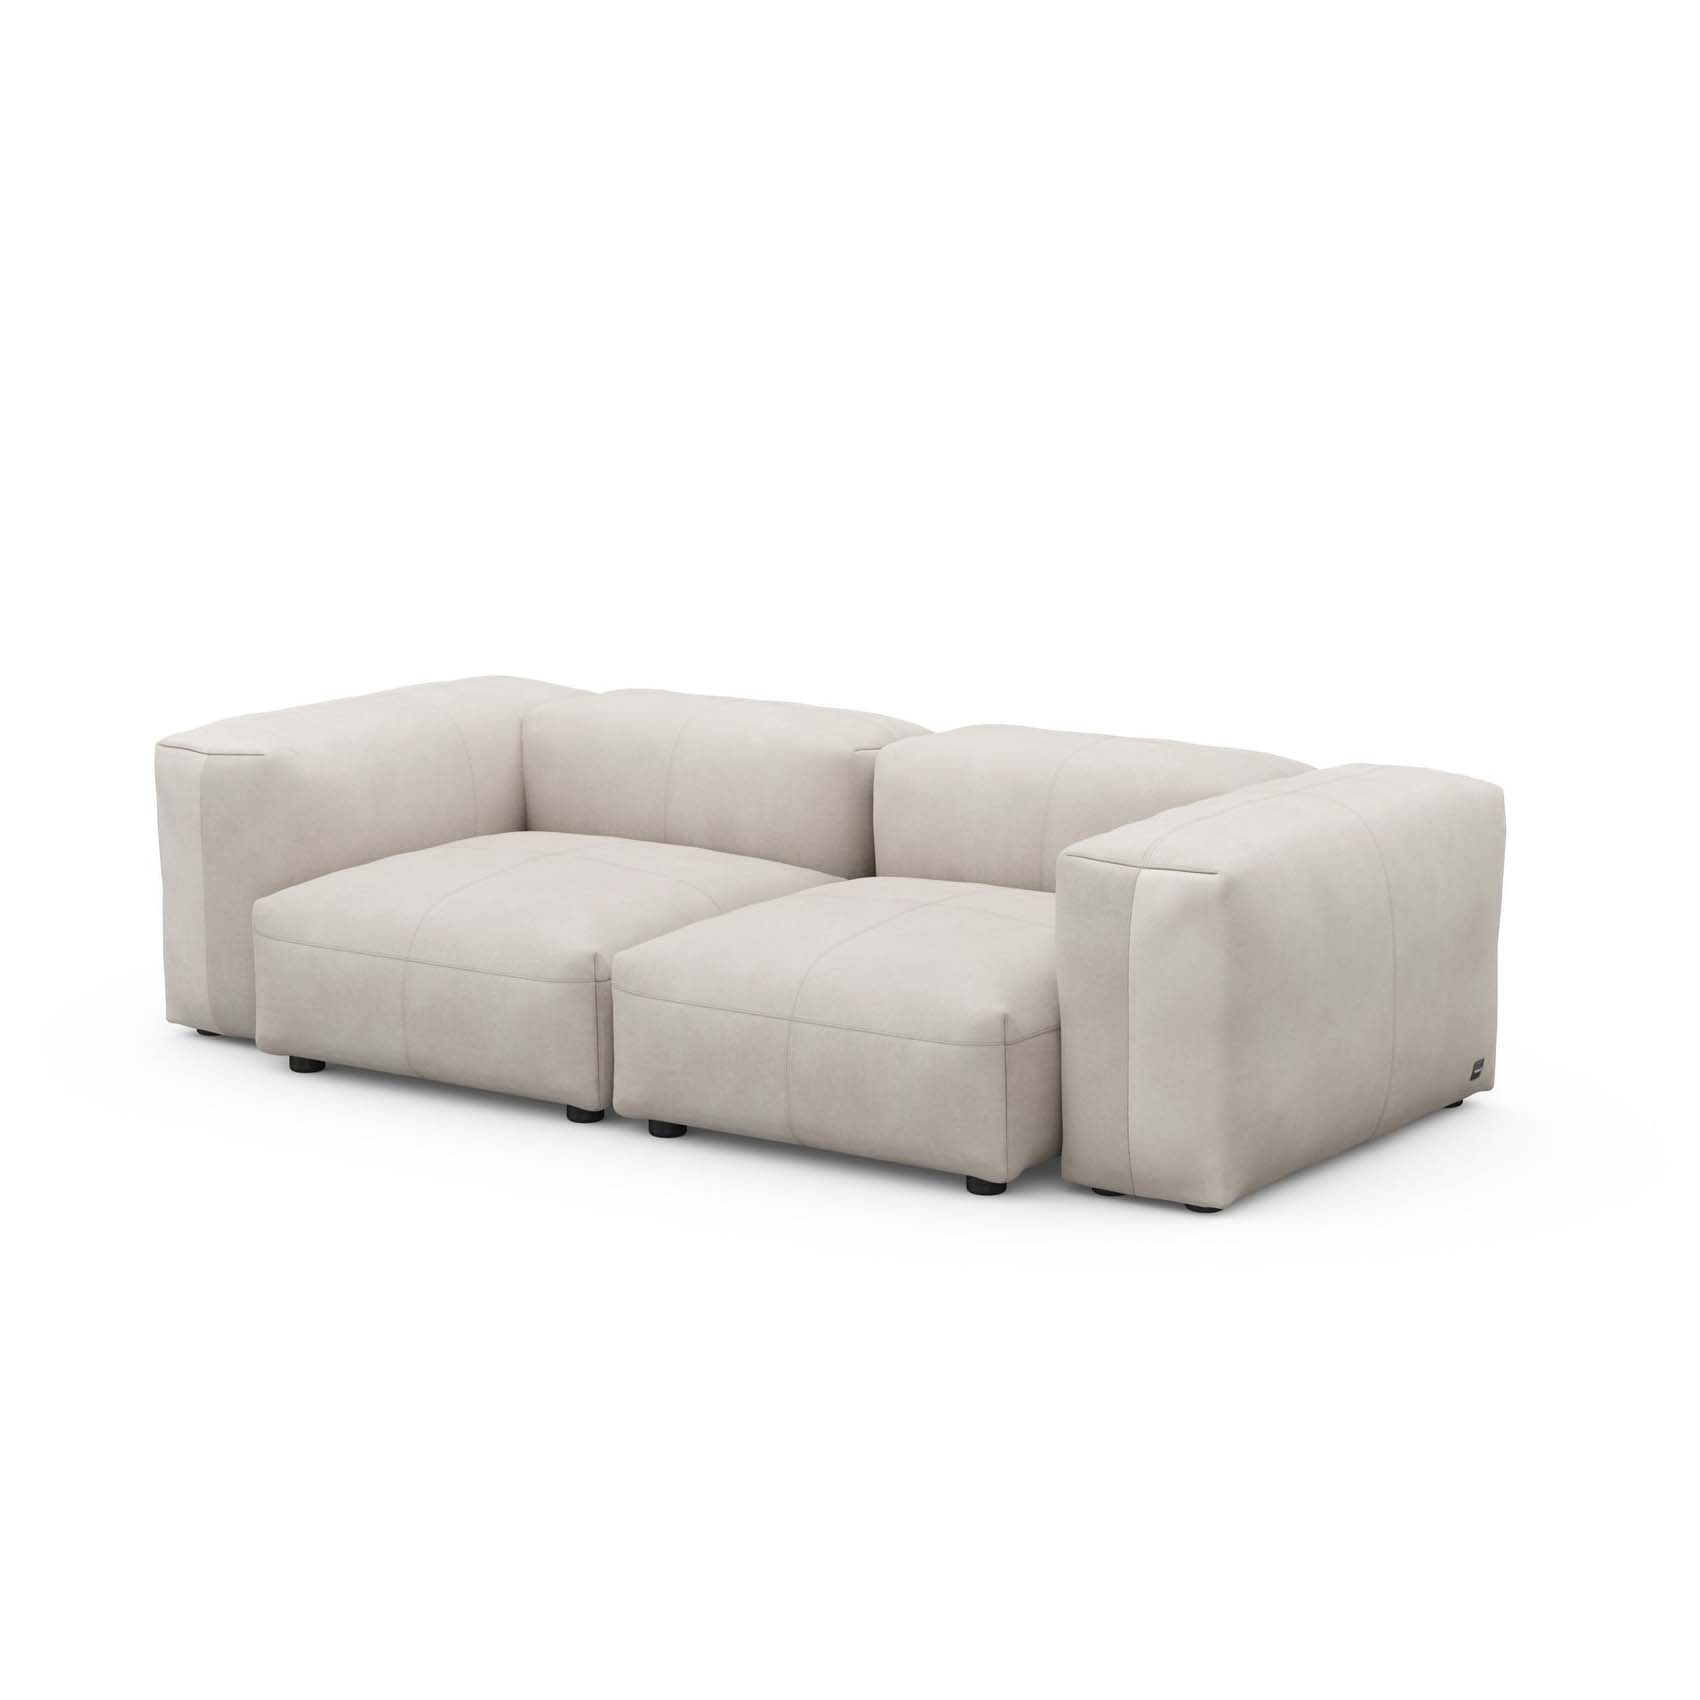 Two Seat Sofa S Leather Light Grey